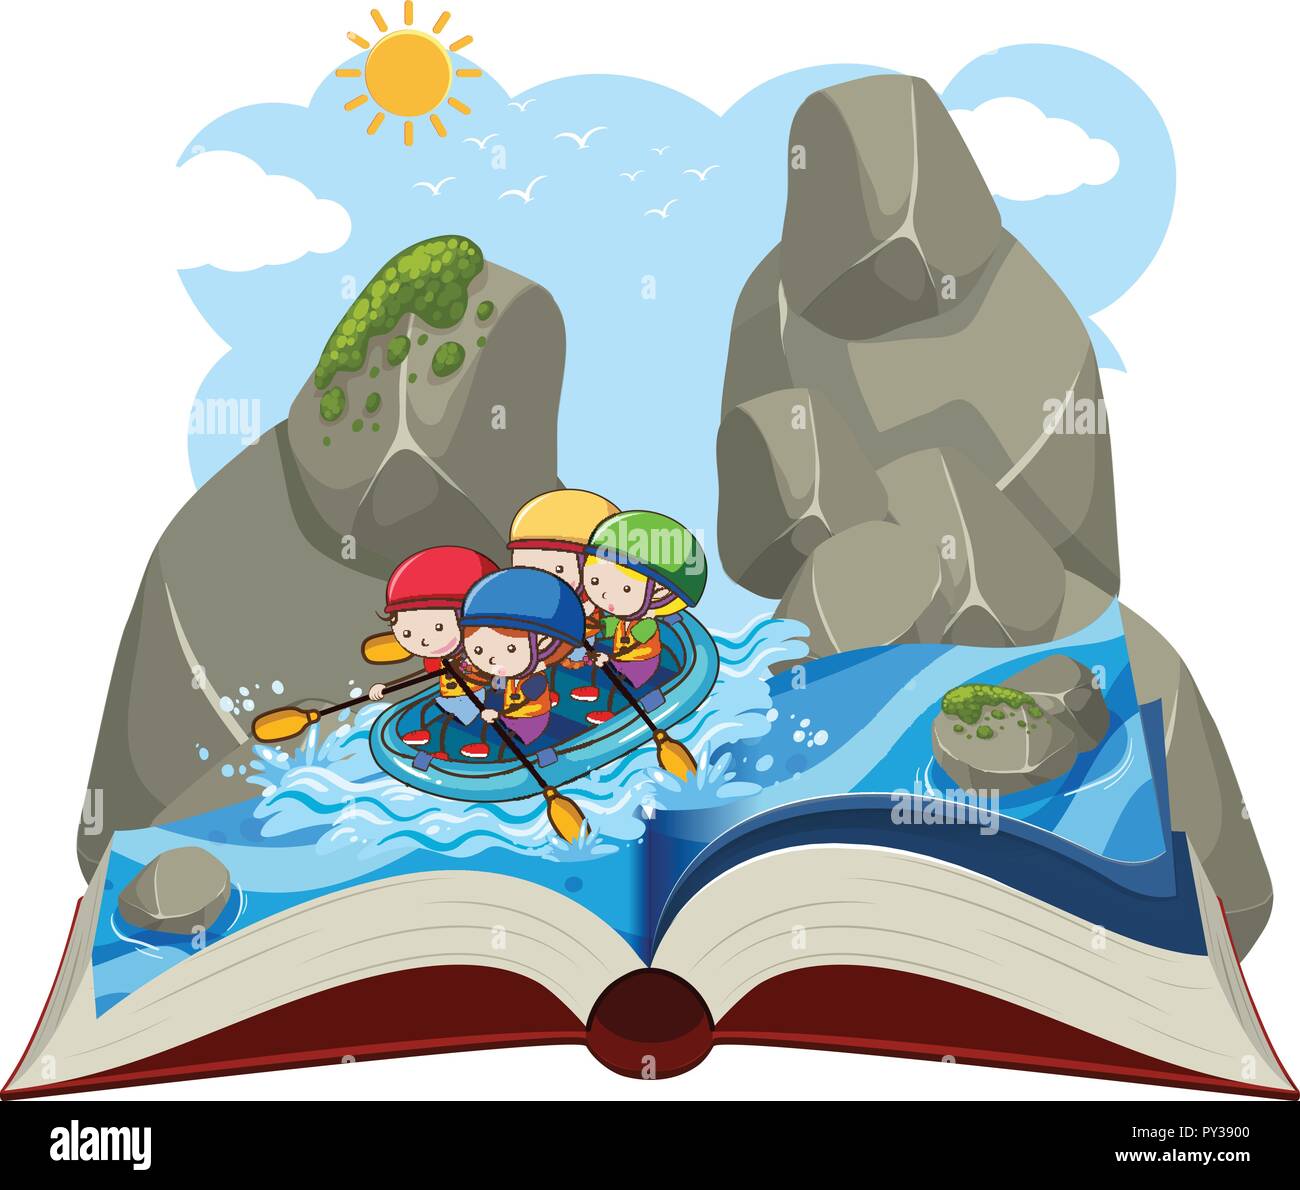 People water rafting on a pop up book illustration Stock Vector